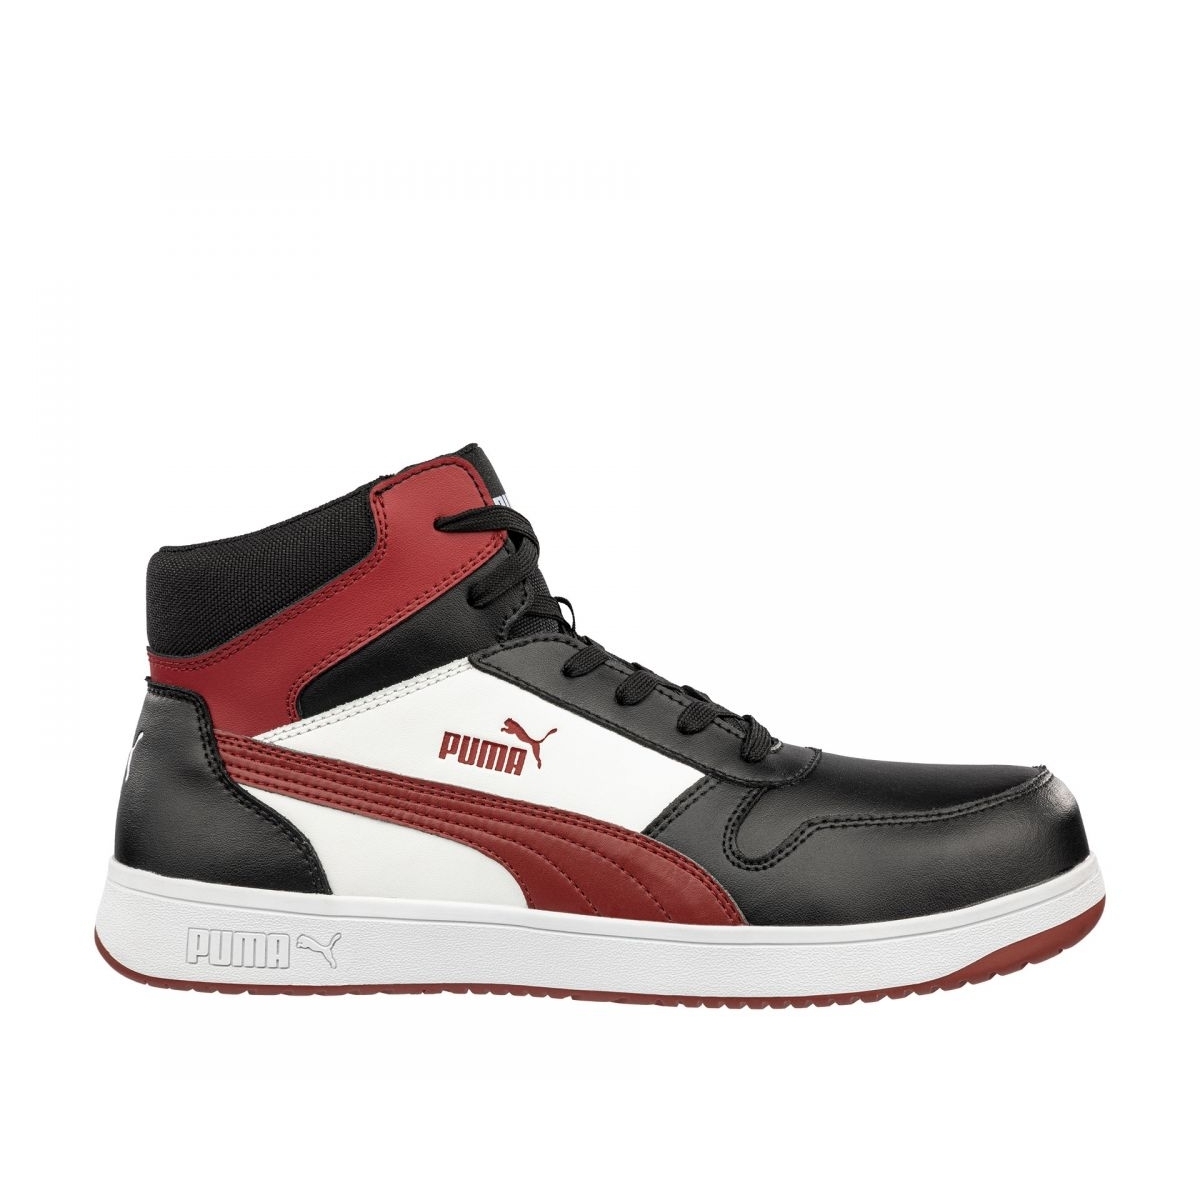 PUMA Safety Men's Frontcourt Mid Composite Toe Waterproof Work Boot Black/White/Red - 630055 BLK/ WHT/RED - BLK/ WHT/RED, 9